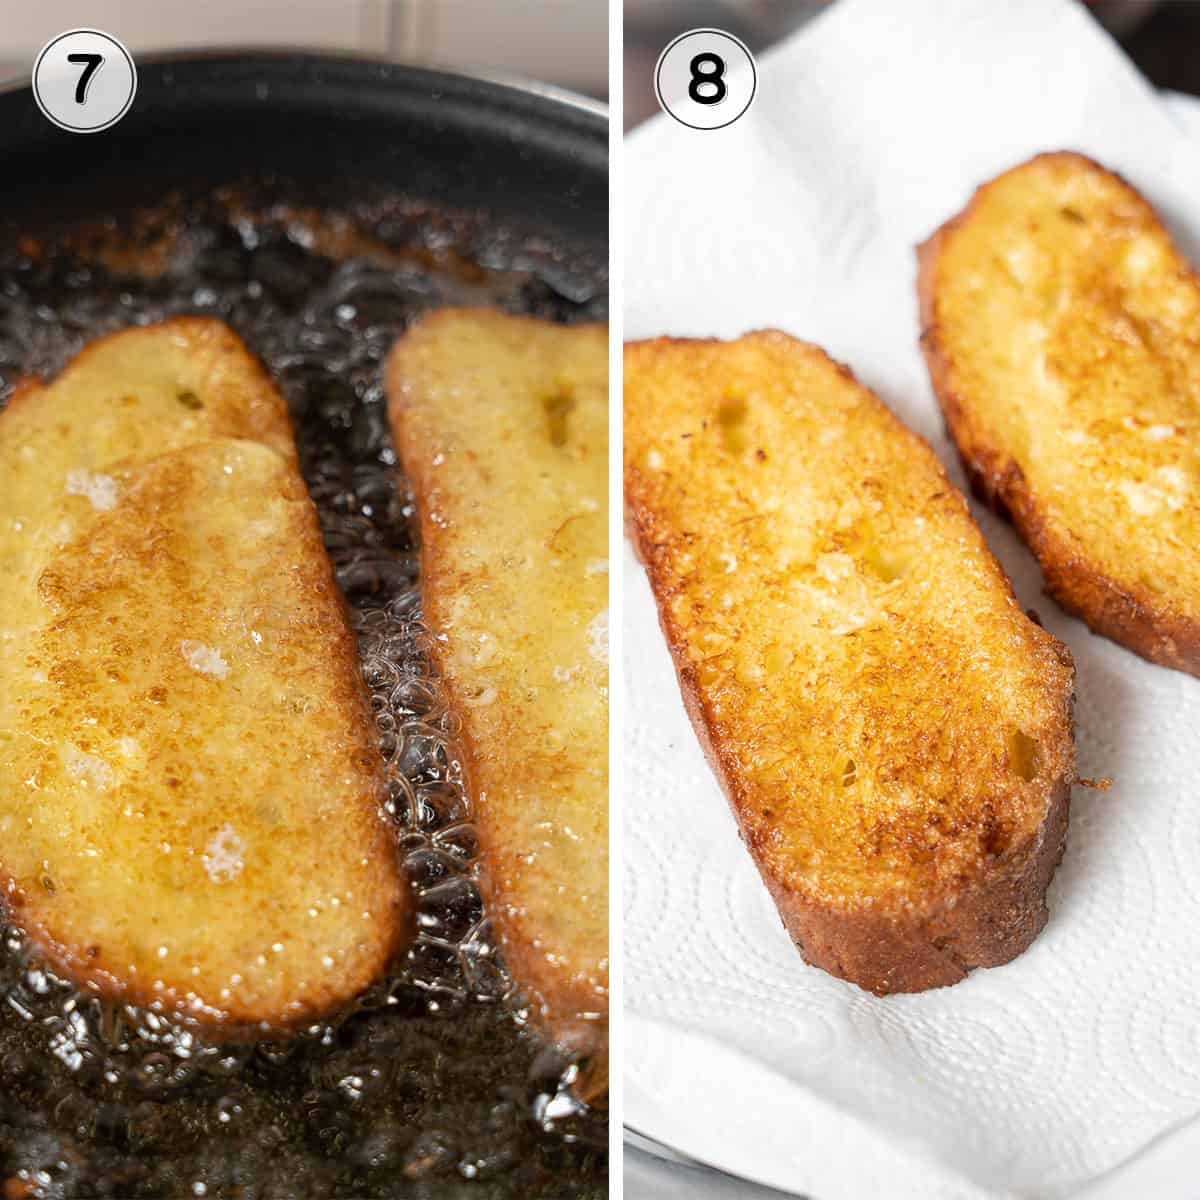 frying the bread in olive oil and draining it on paper towels.